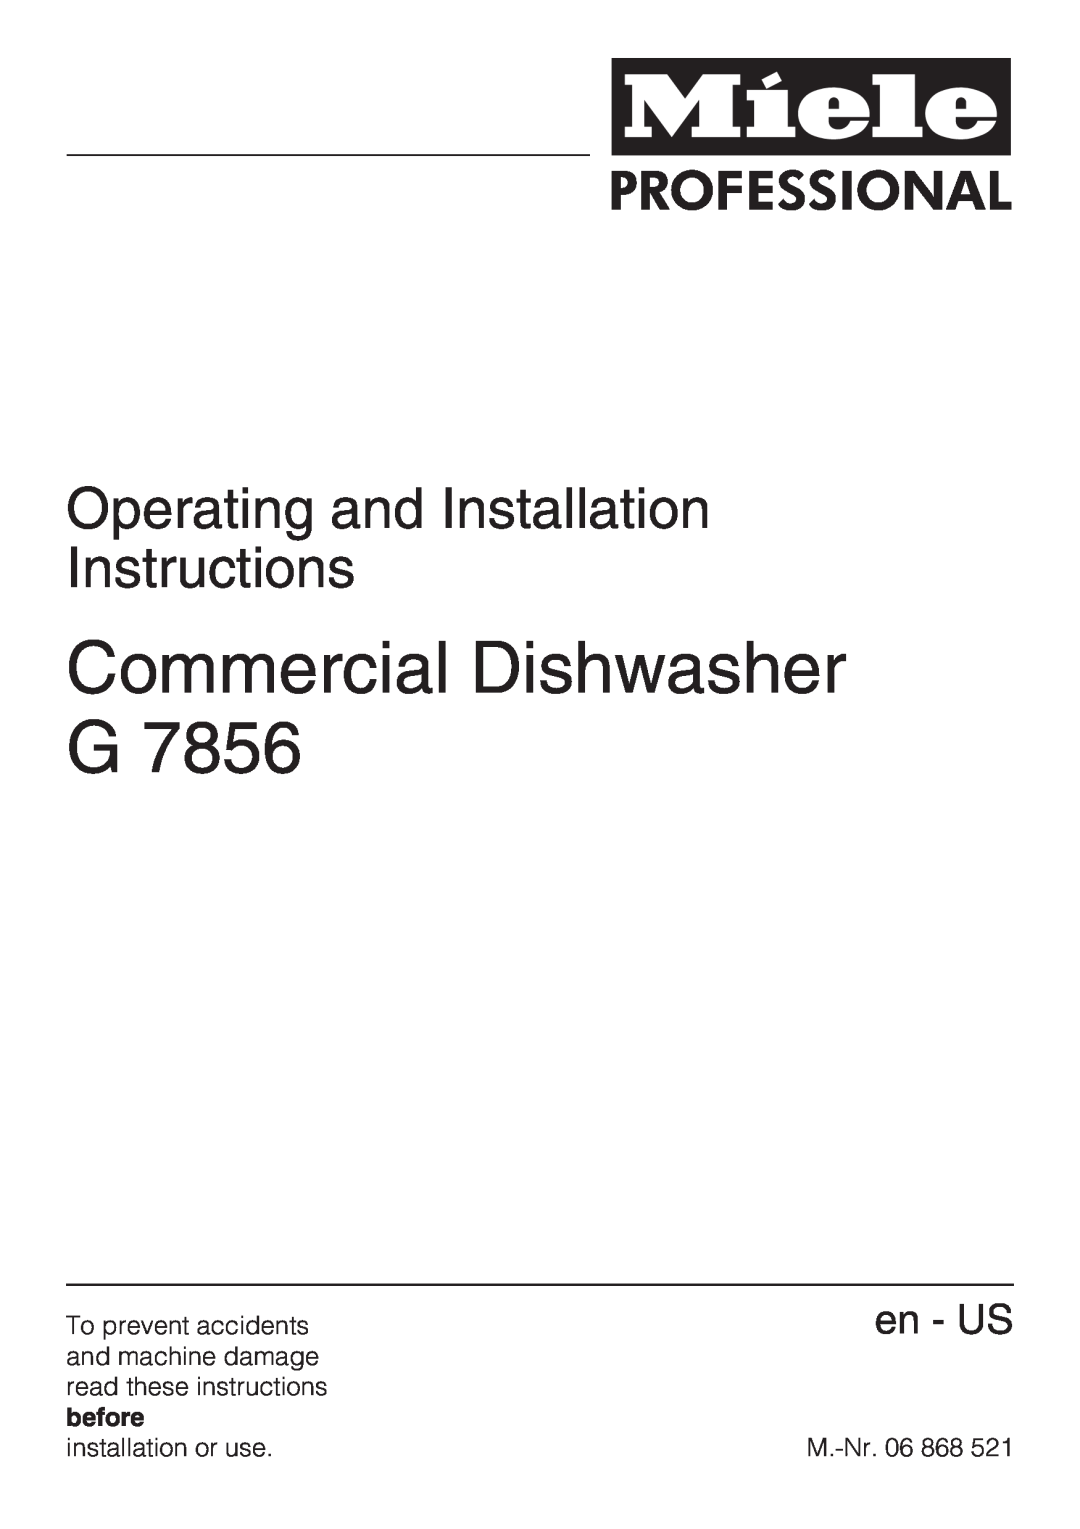 Miele 06 868 521 installation instructions Operating and Installation Instructions, Commercial Dishwasher G, en - US 